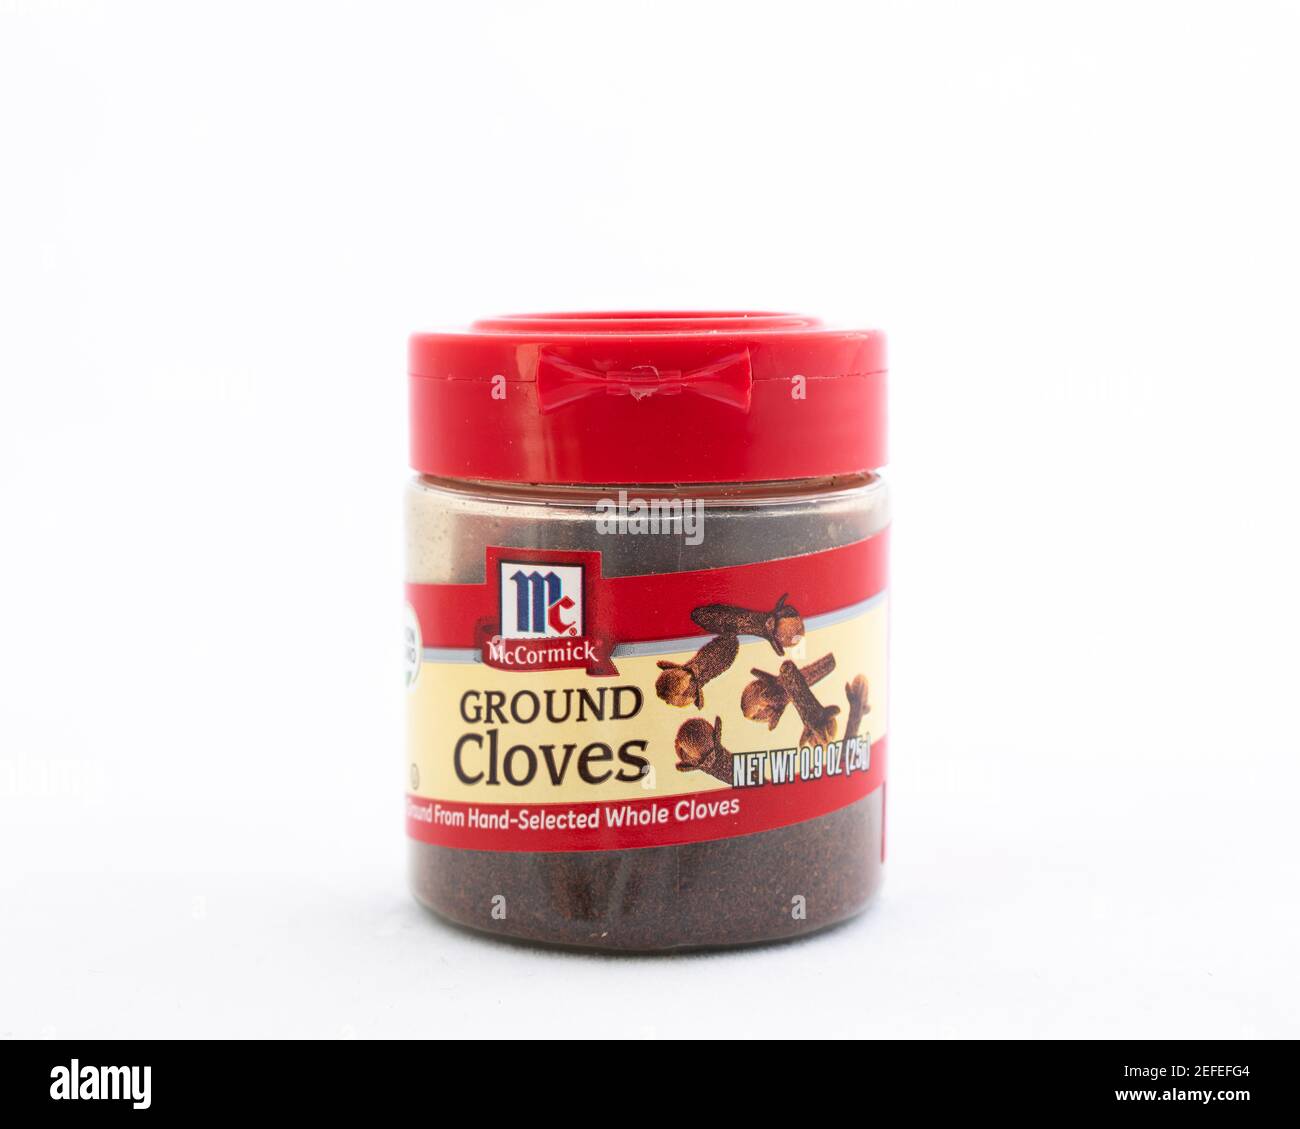 A plastic bottle of McCormick ground cloves, for bringing an intense warm flavor to foods, from the flower buds of the clove tree Stock Photo